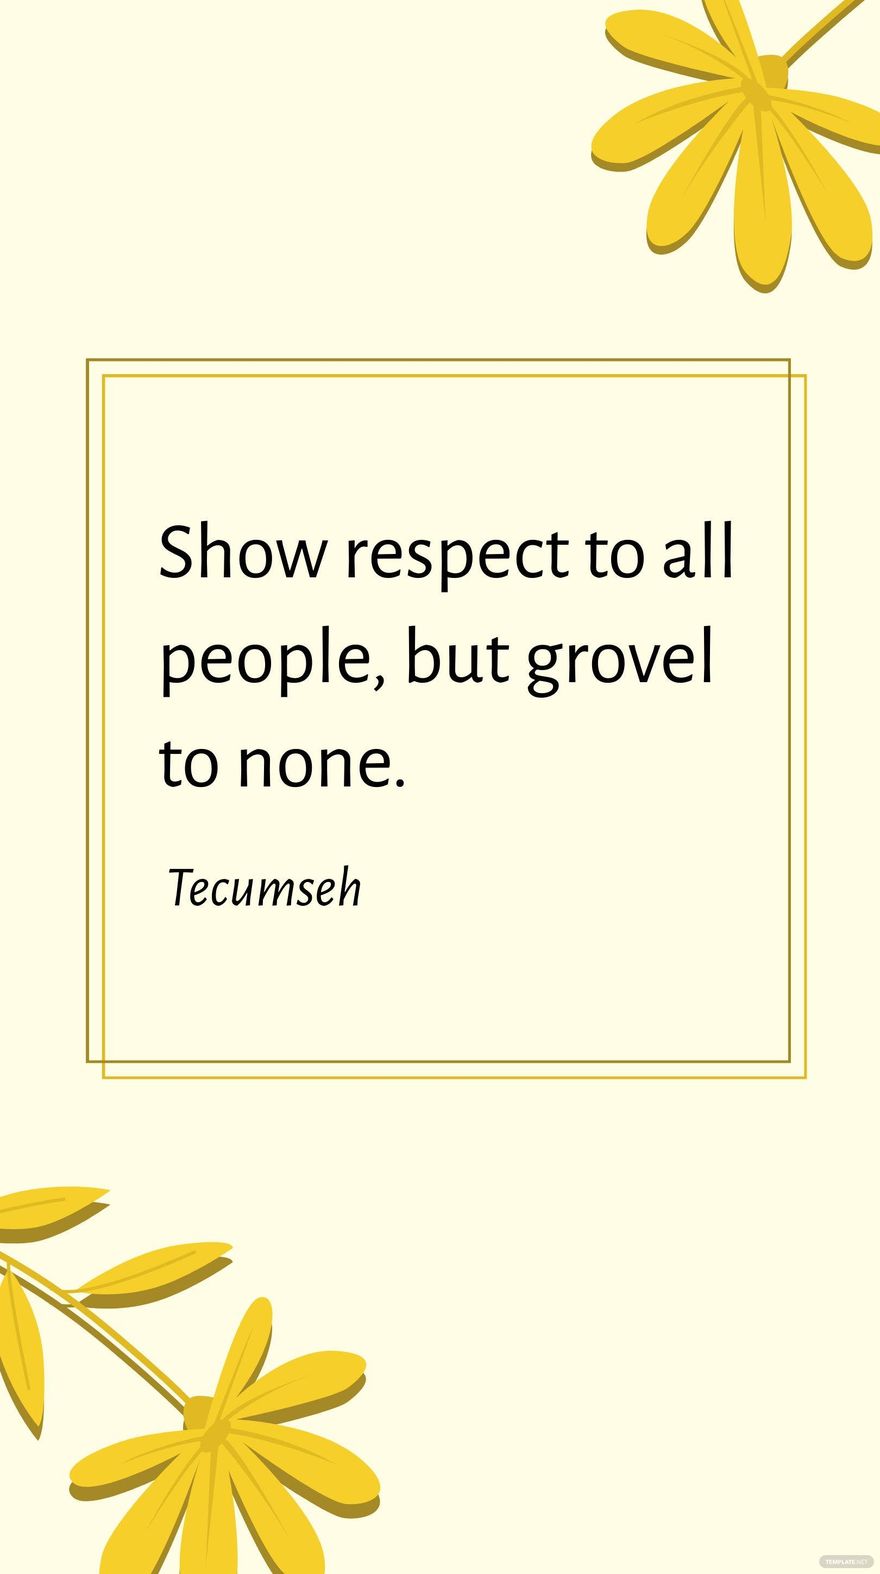 Free Tecumseh - Show respect to all people, but grovel to none. in JPG